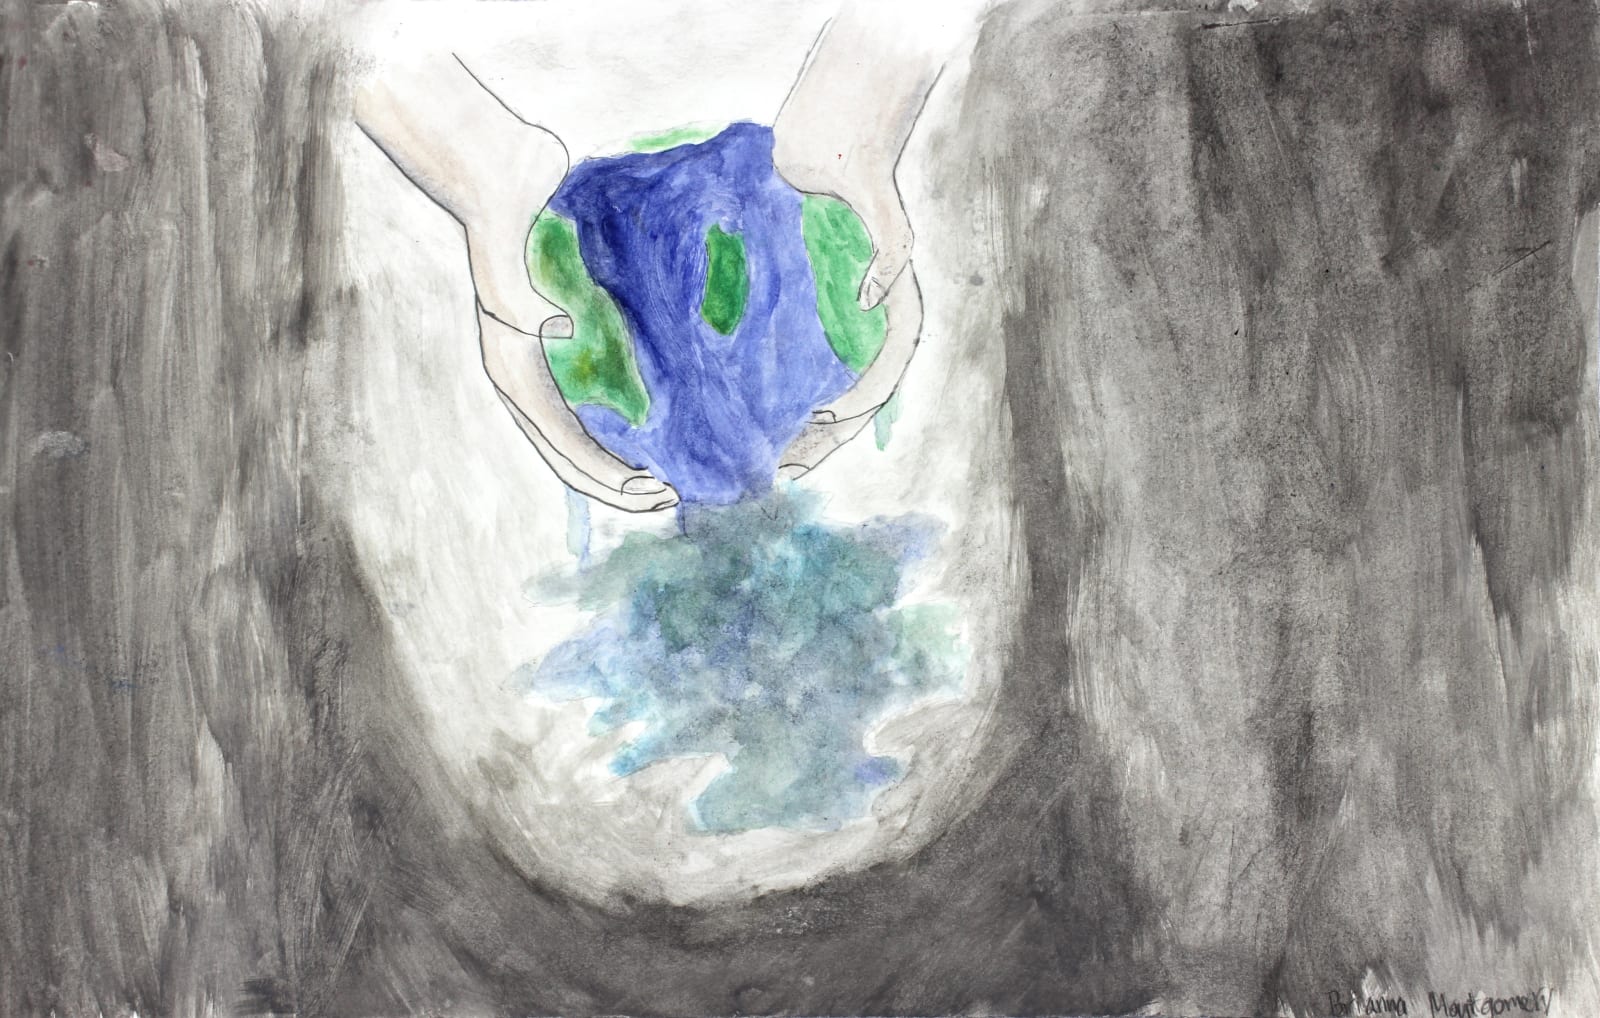 Middle School Honorable Mention $50 BRIANNA MONTGOMERY (TENNYSON MIDDLE SCHOOL) MELTING EARTH [20] Tempra paint on paper